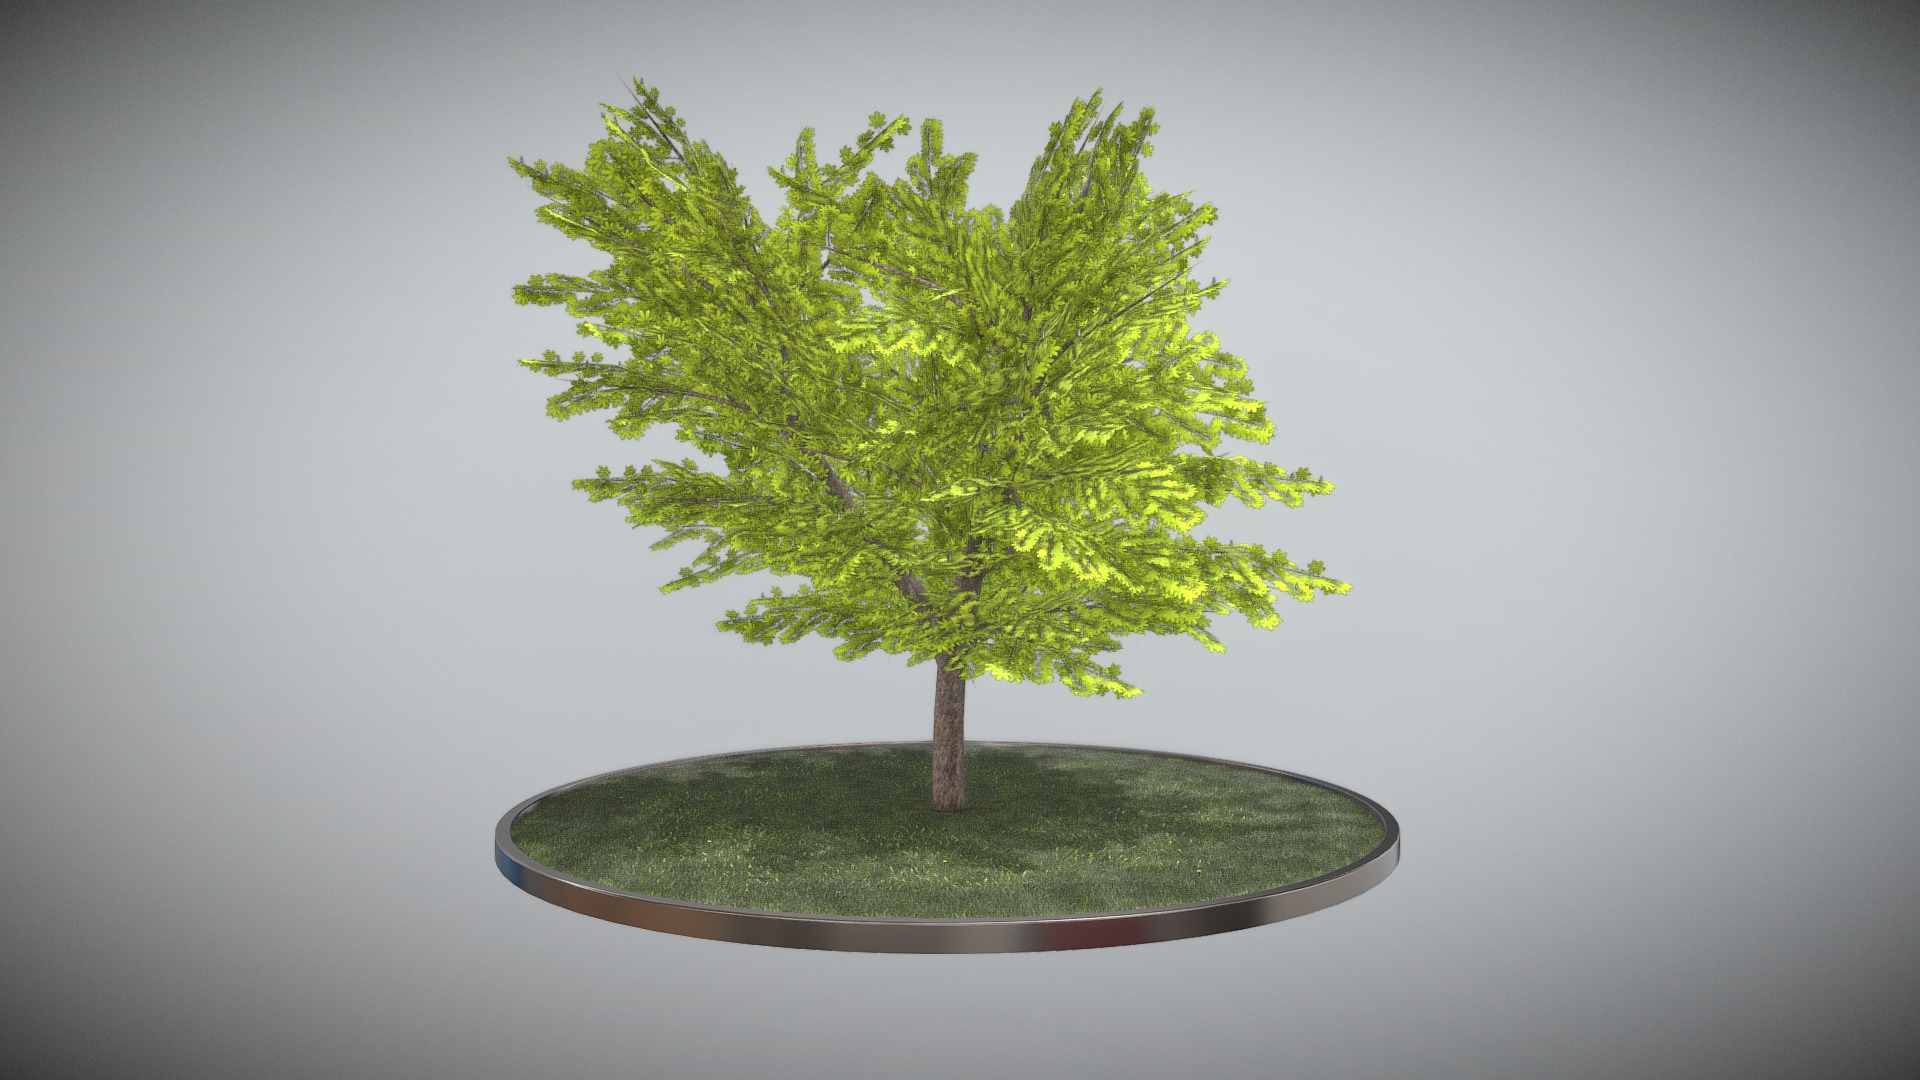 3D model Kastanie 21 Meter – Frühling - This is a 3D model of the Kastanie 21 Meter - Frühling. The 3D model is about a tree in a pot.